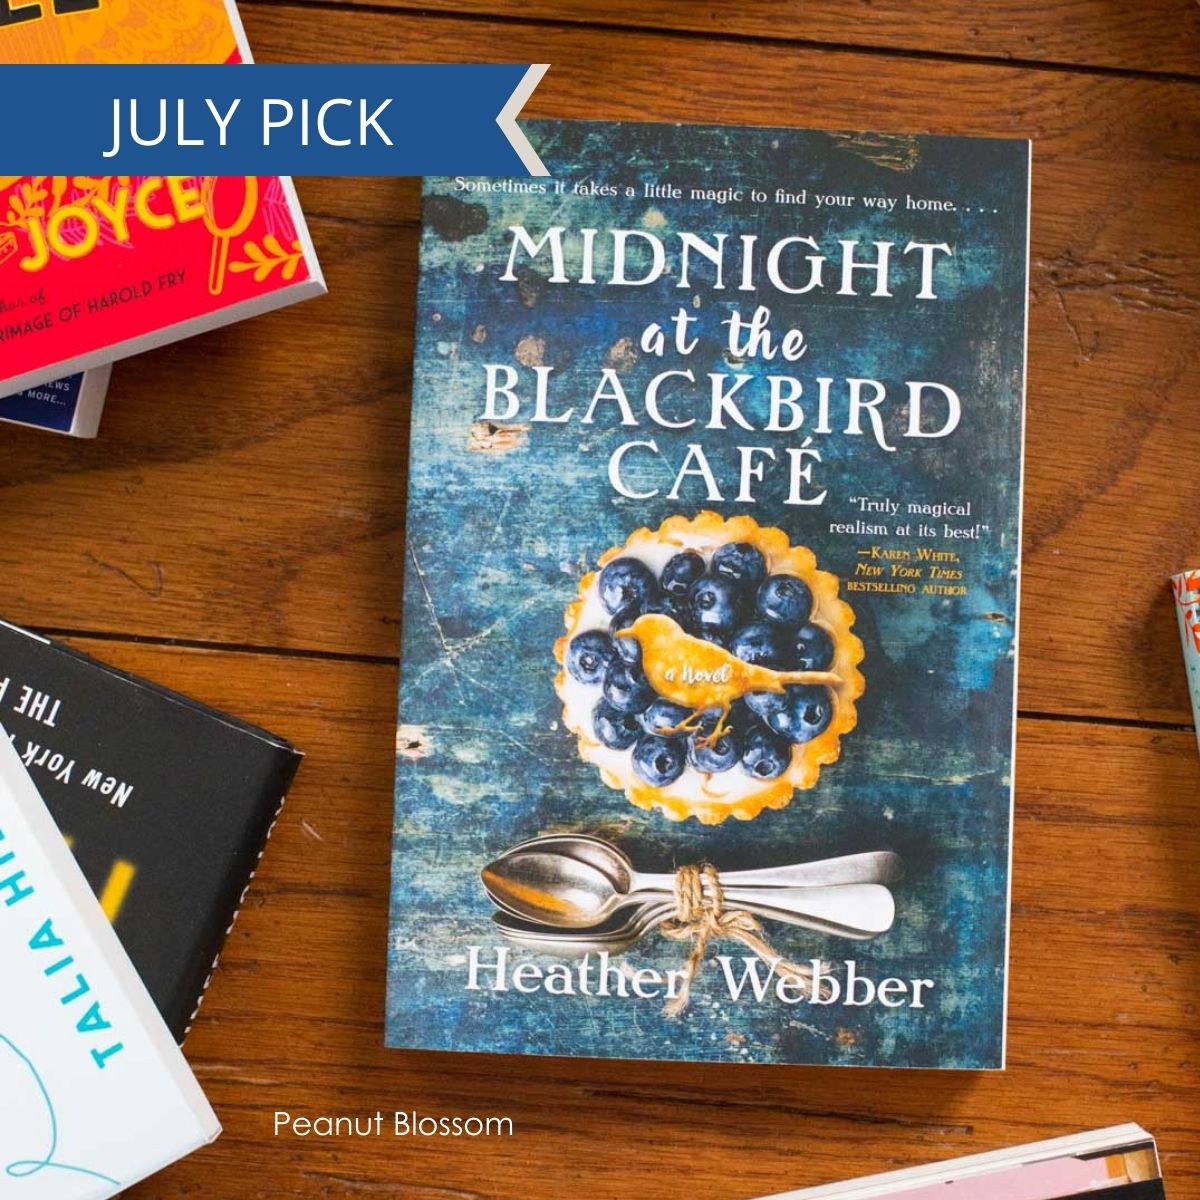 A copy of Midnight at the Blackbird cafe sits on a table.